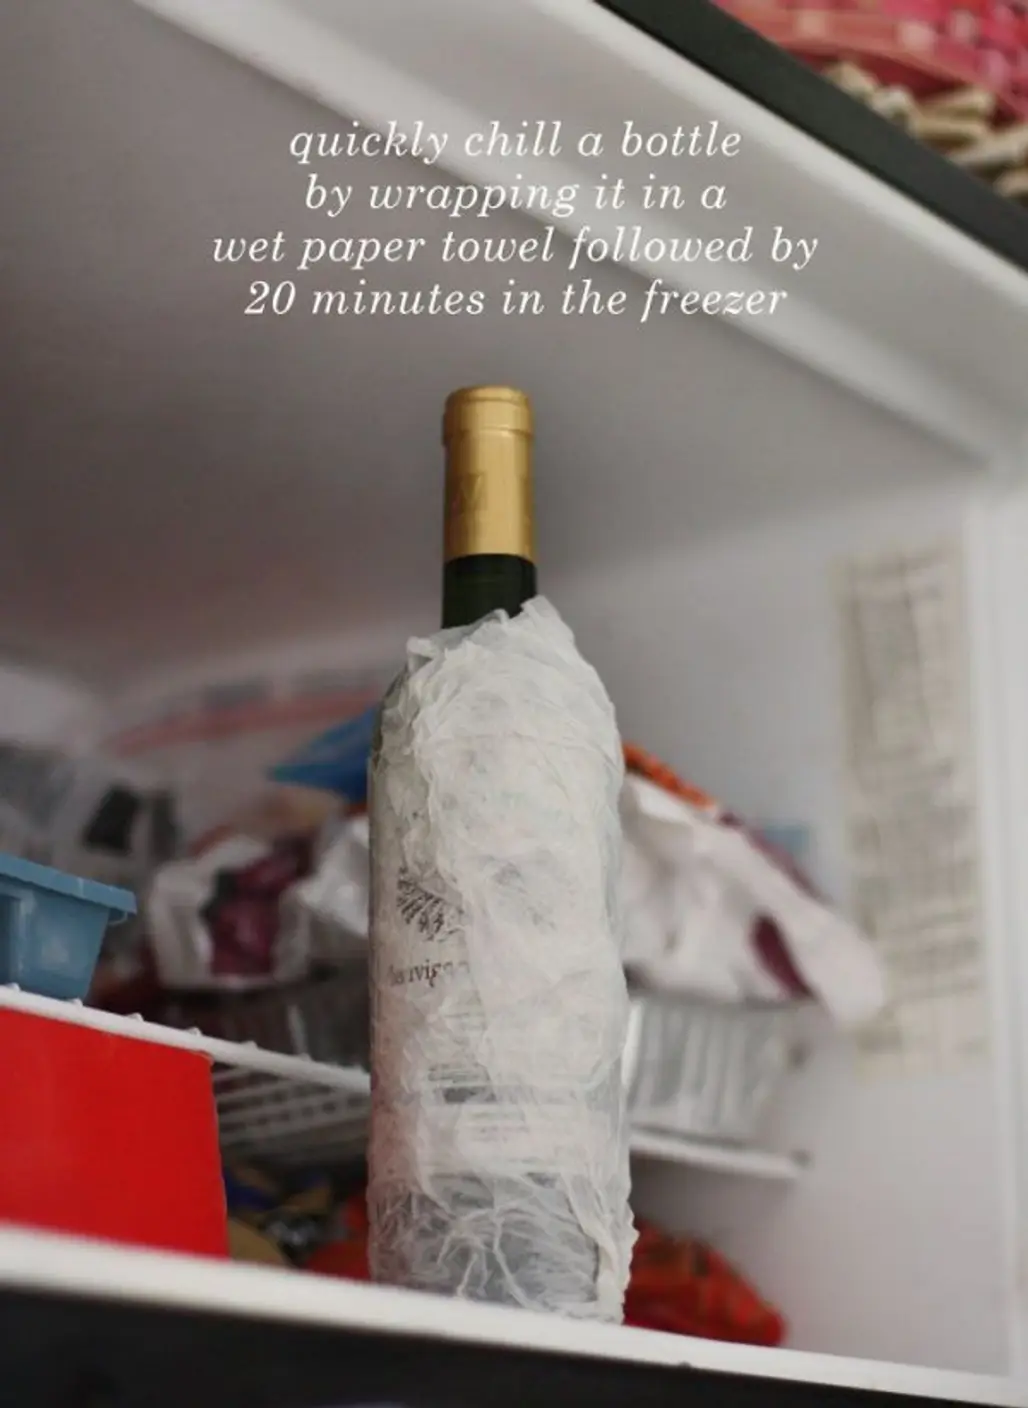 For a Quick Chill, Wrap in a Wet Paper Towel …